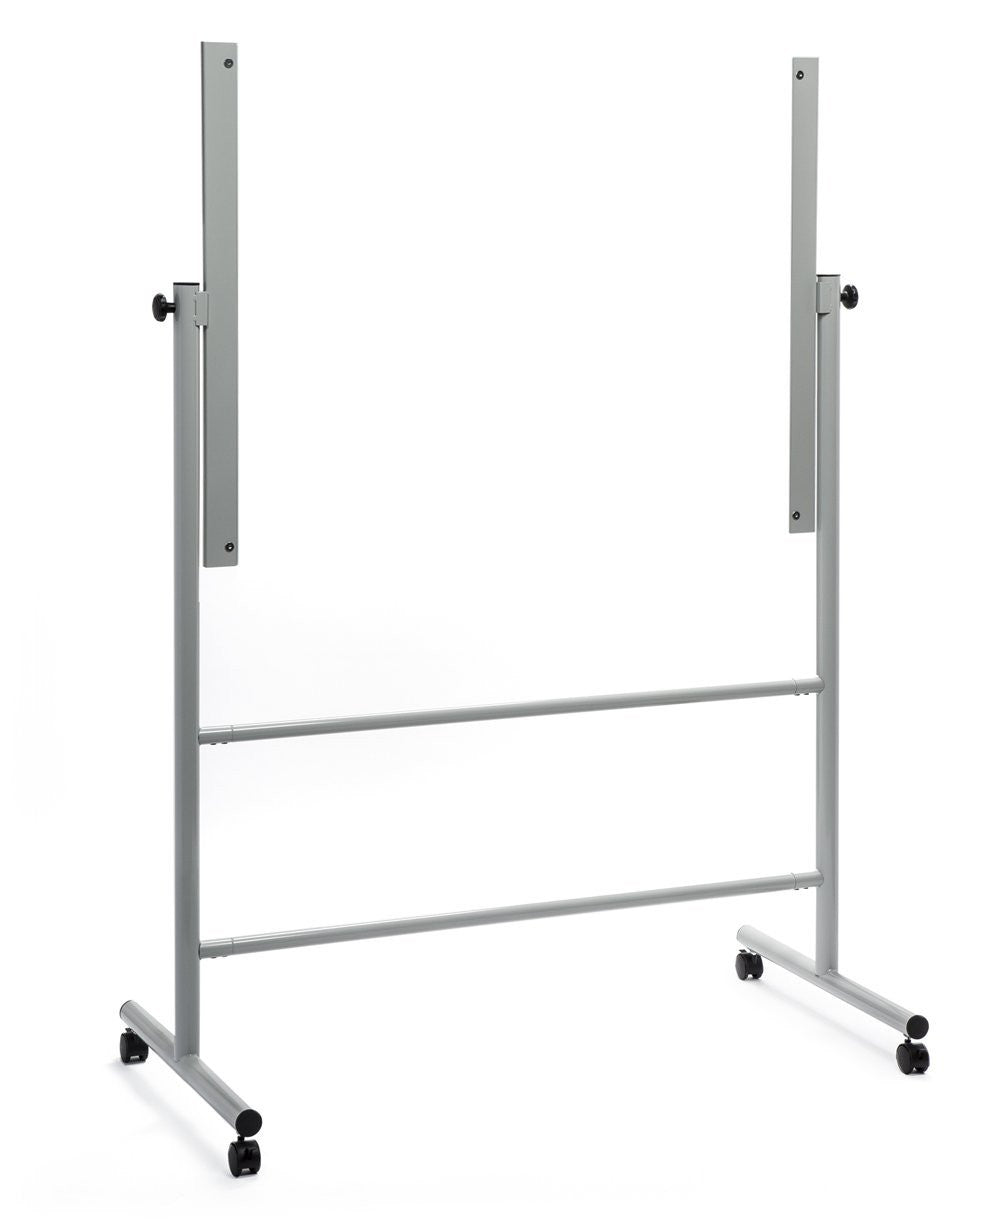 Easel Stand For Glass Dry-Erase Boards (Stand Only Does Not Include Glass Board). Locking wheels and mobile. 